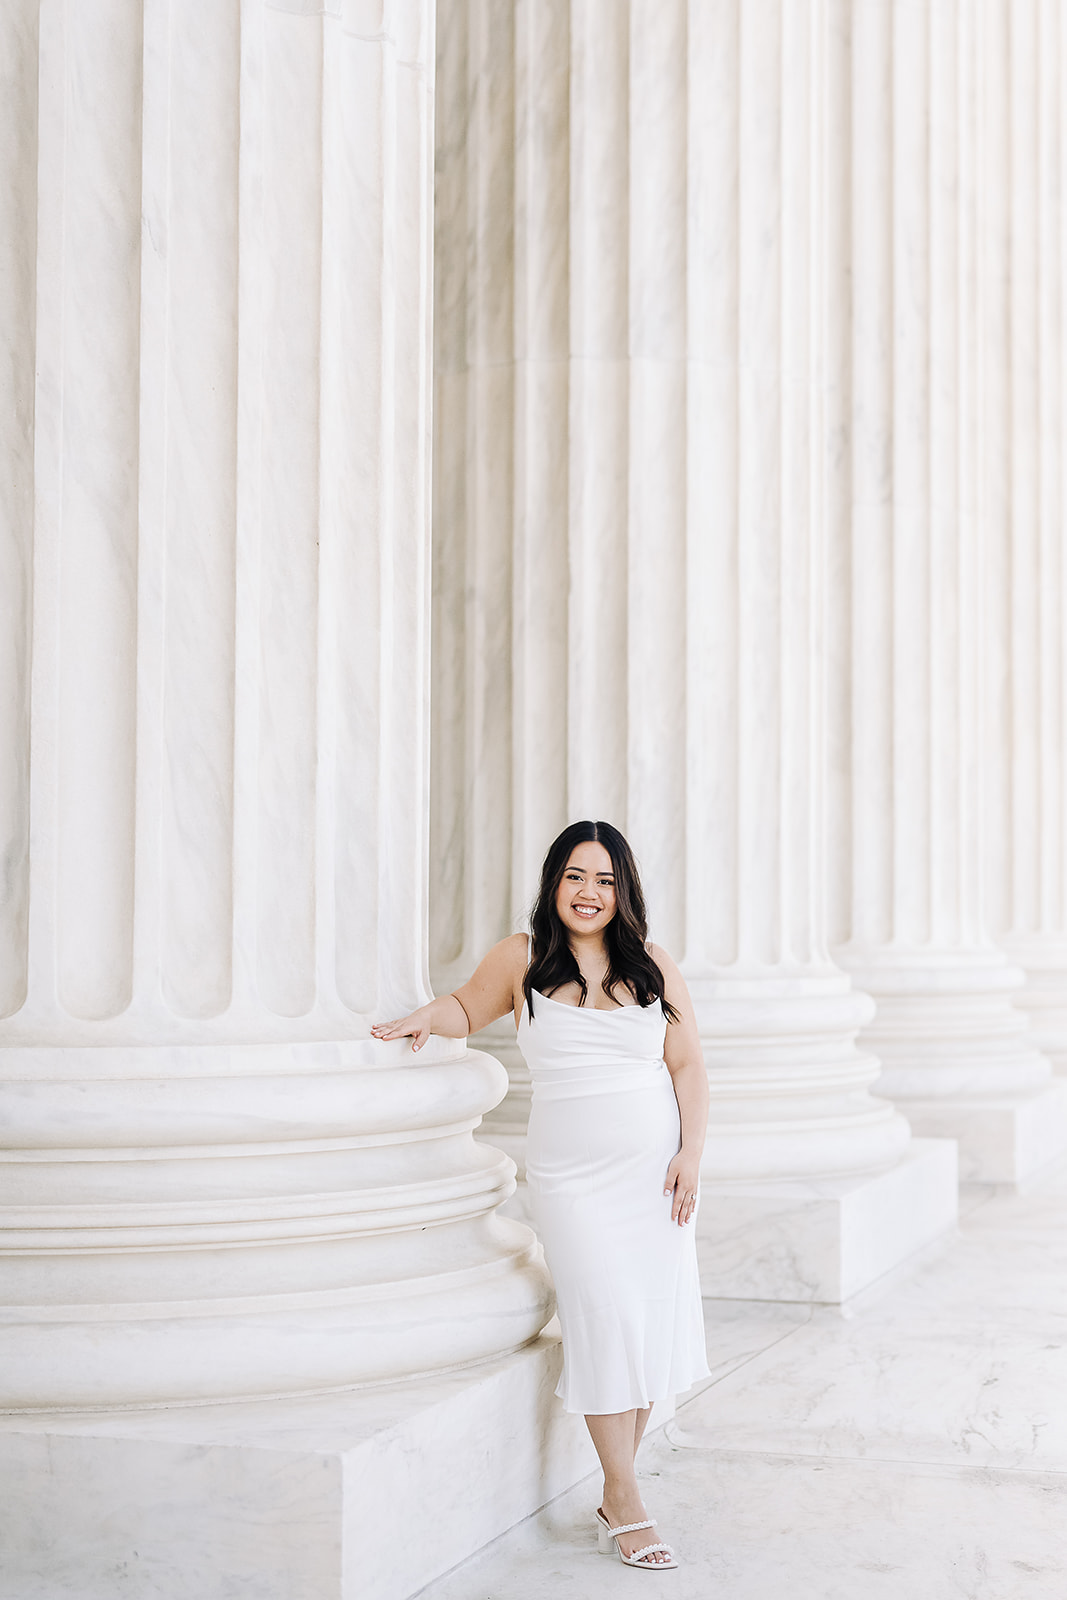 Wedding photography in dc